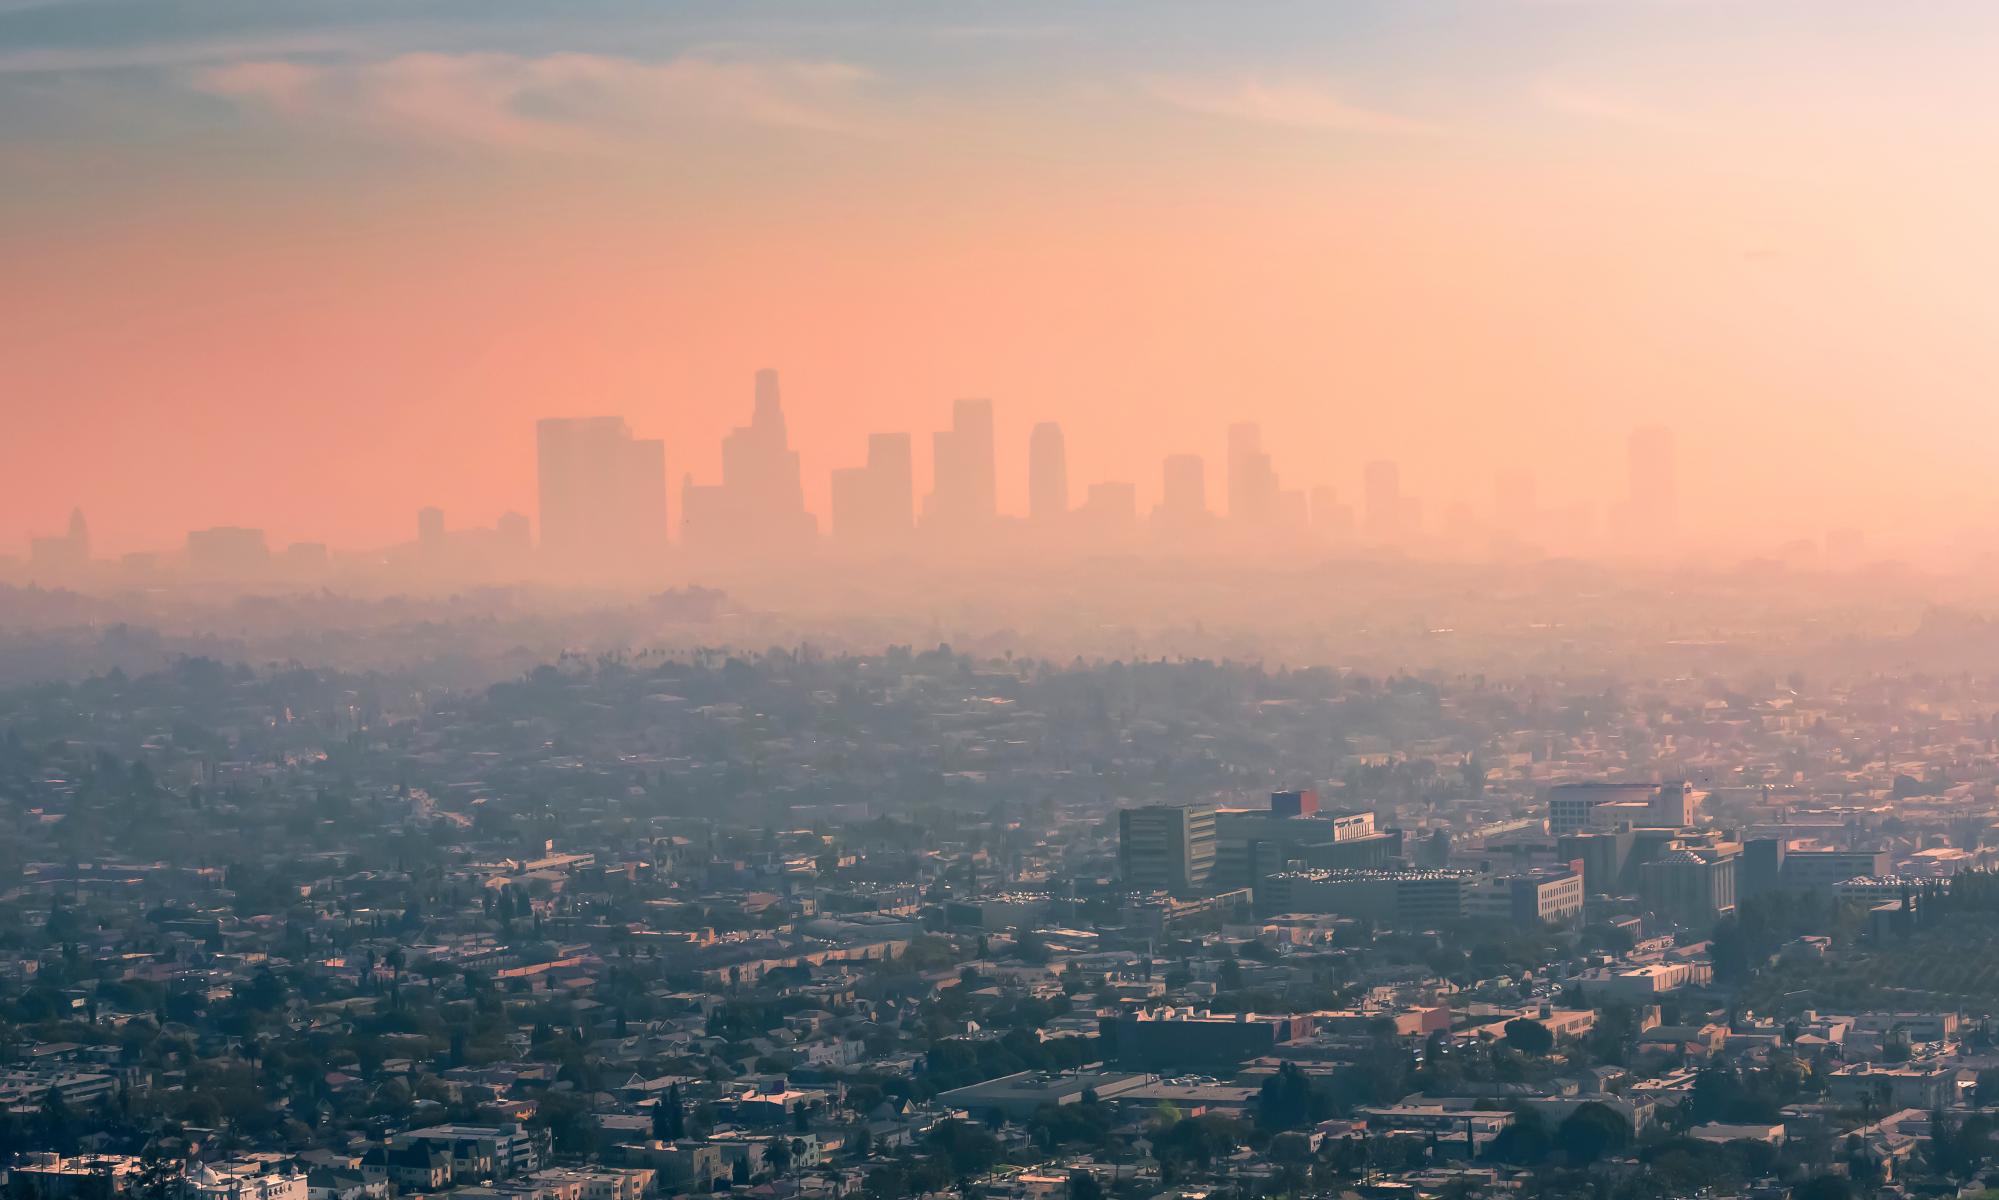 Air pollution remains worst in US communities of color despite progress